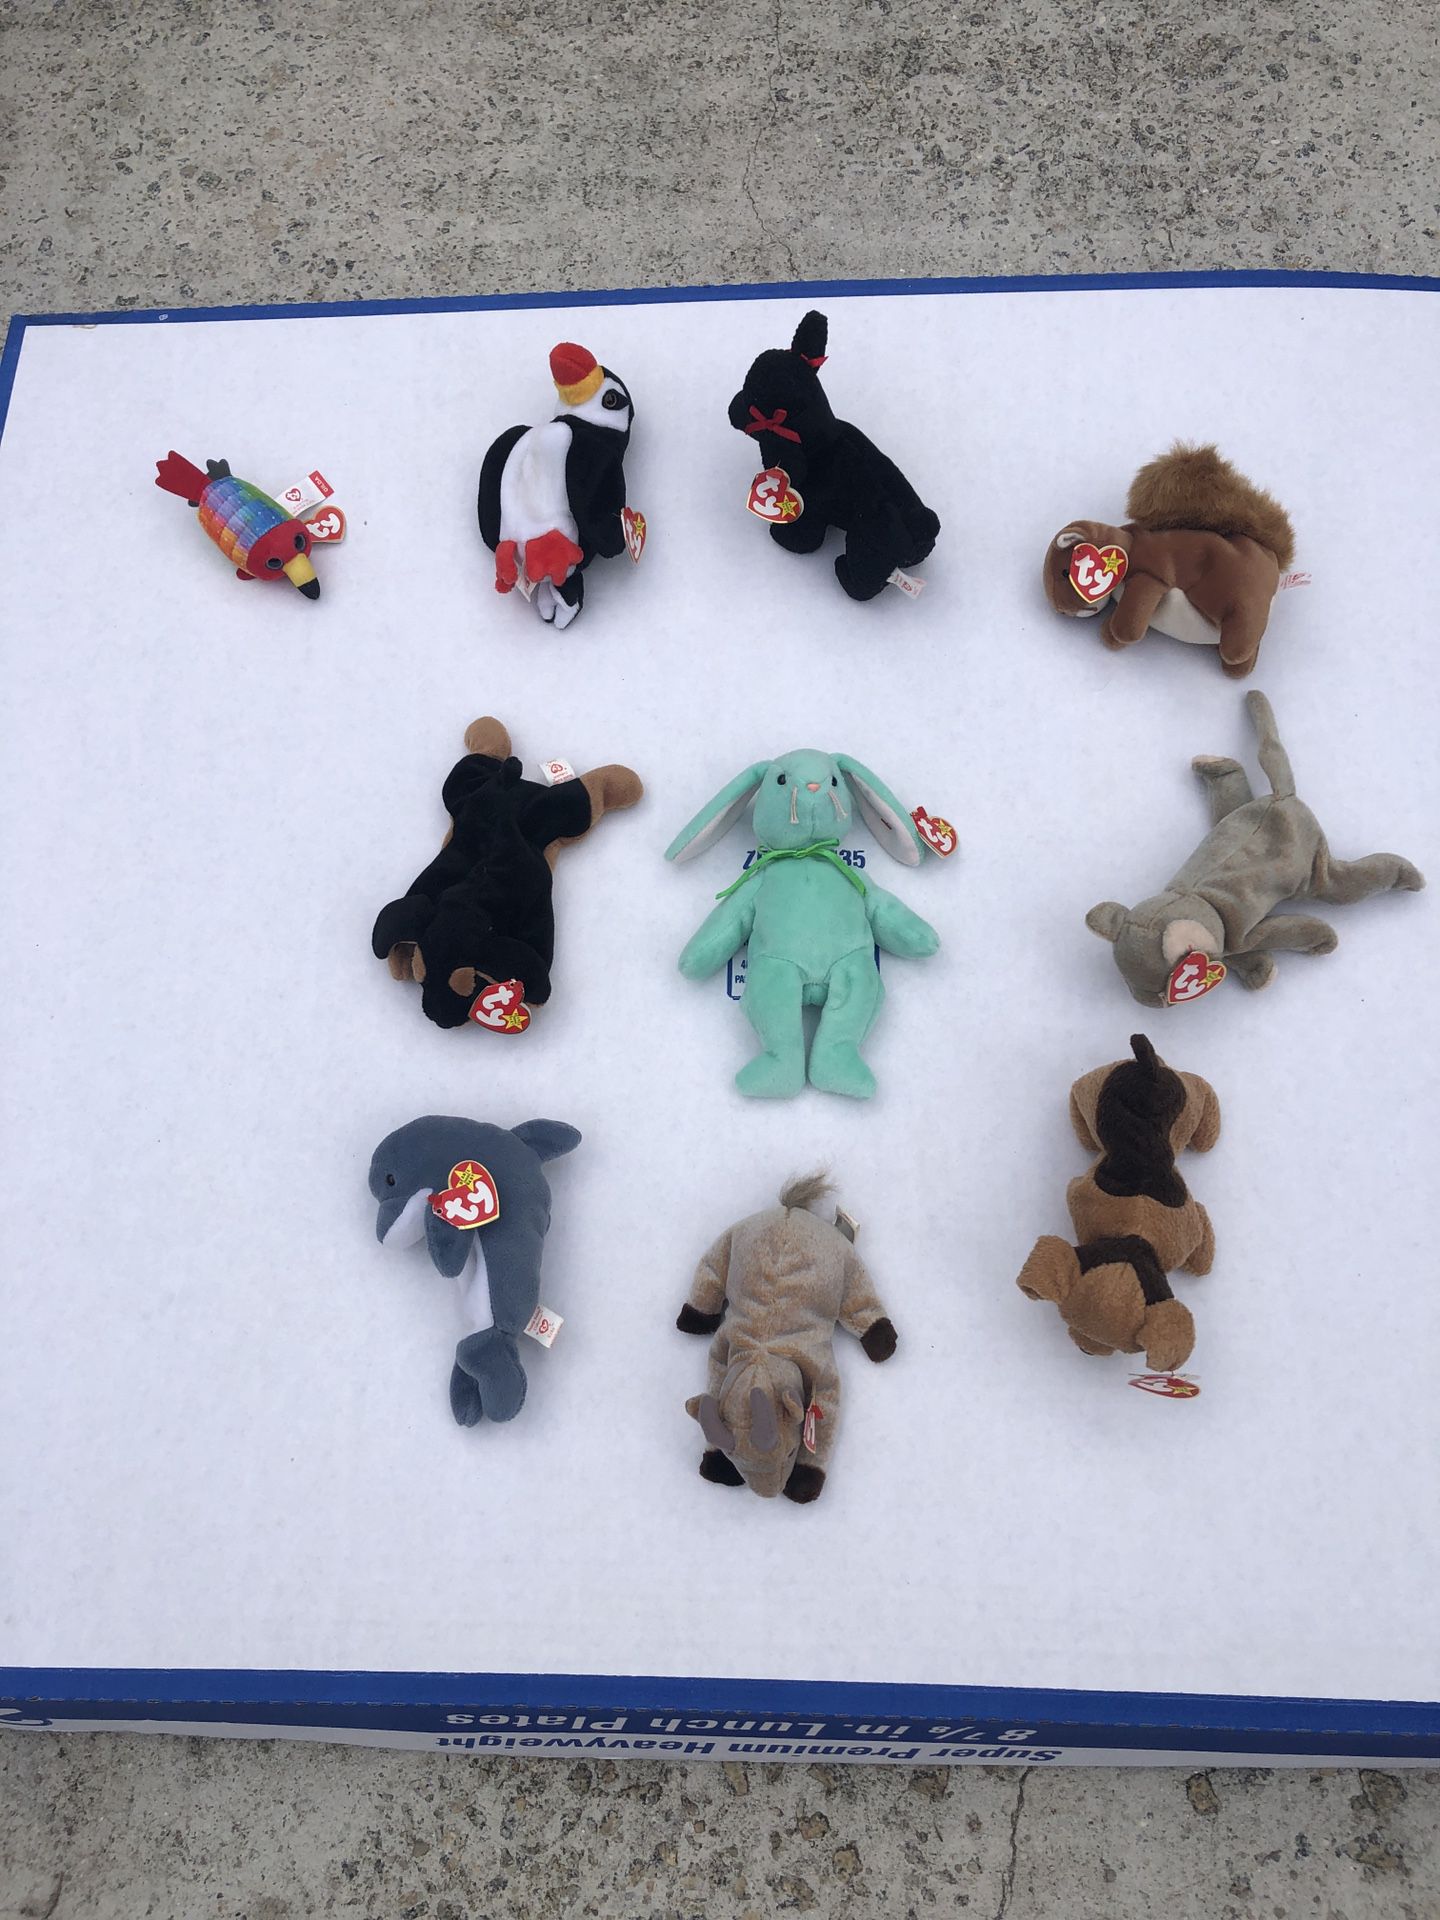 Lot of Ten ty Beanie Babies with Tags - Compare @$50+